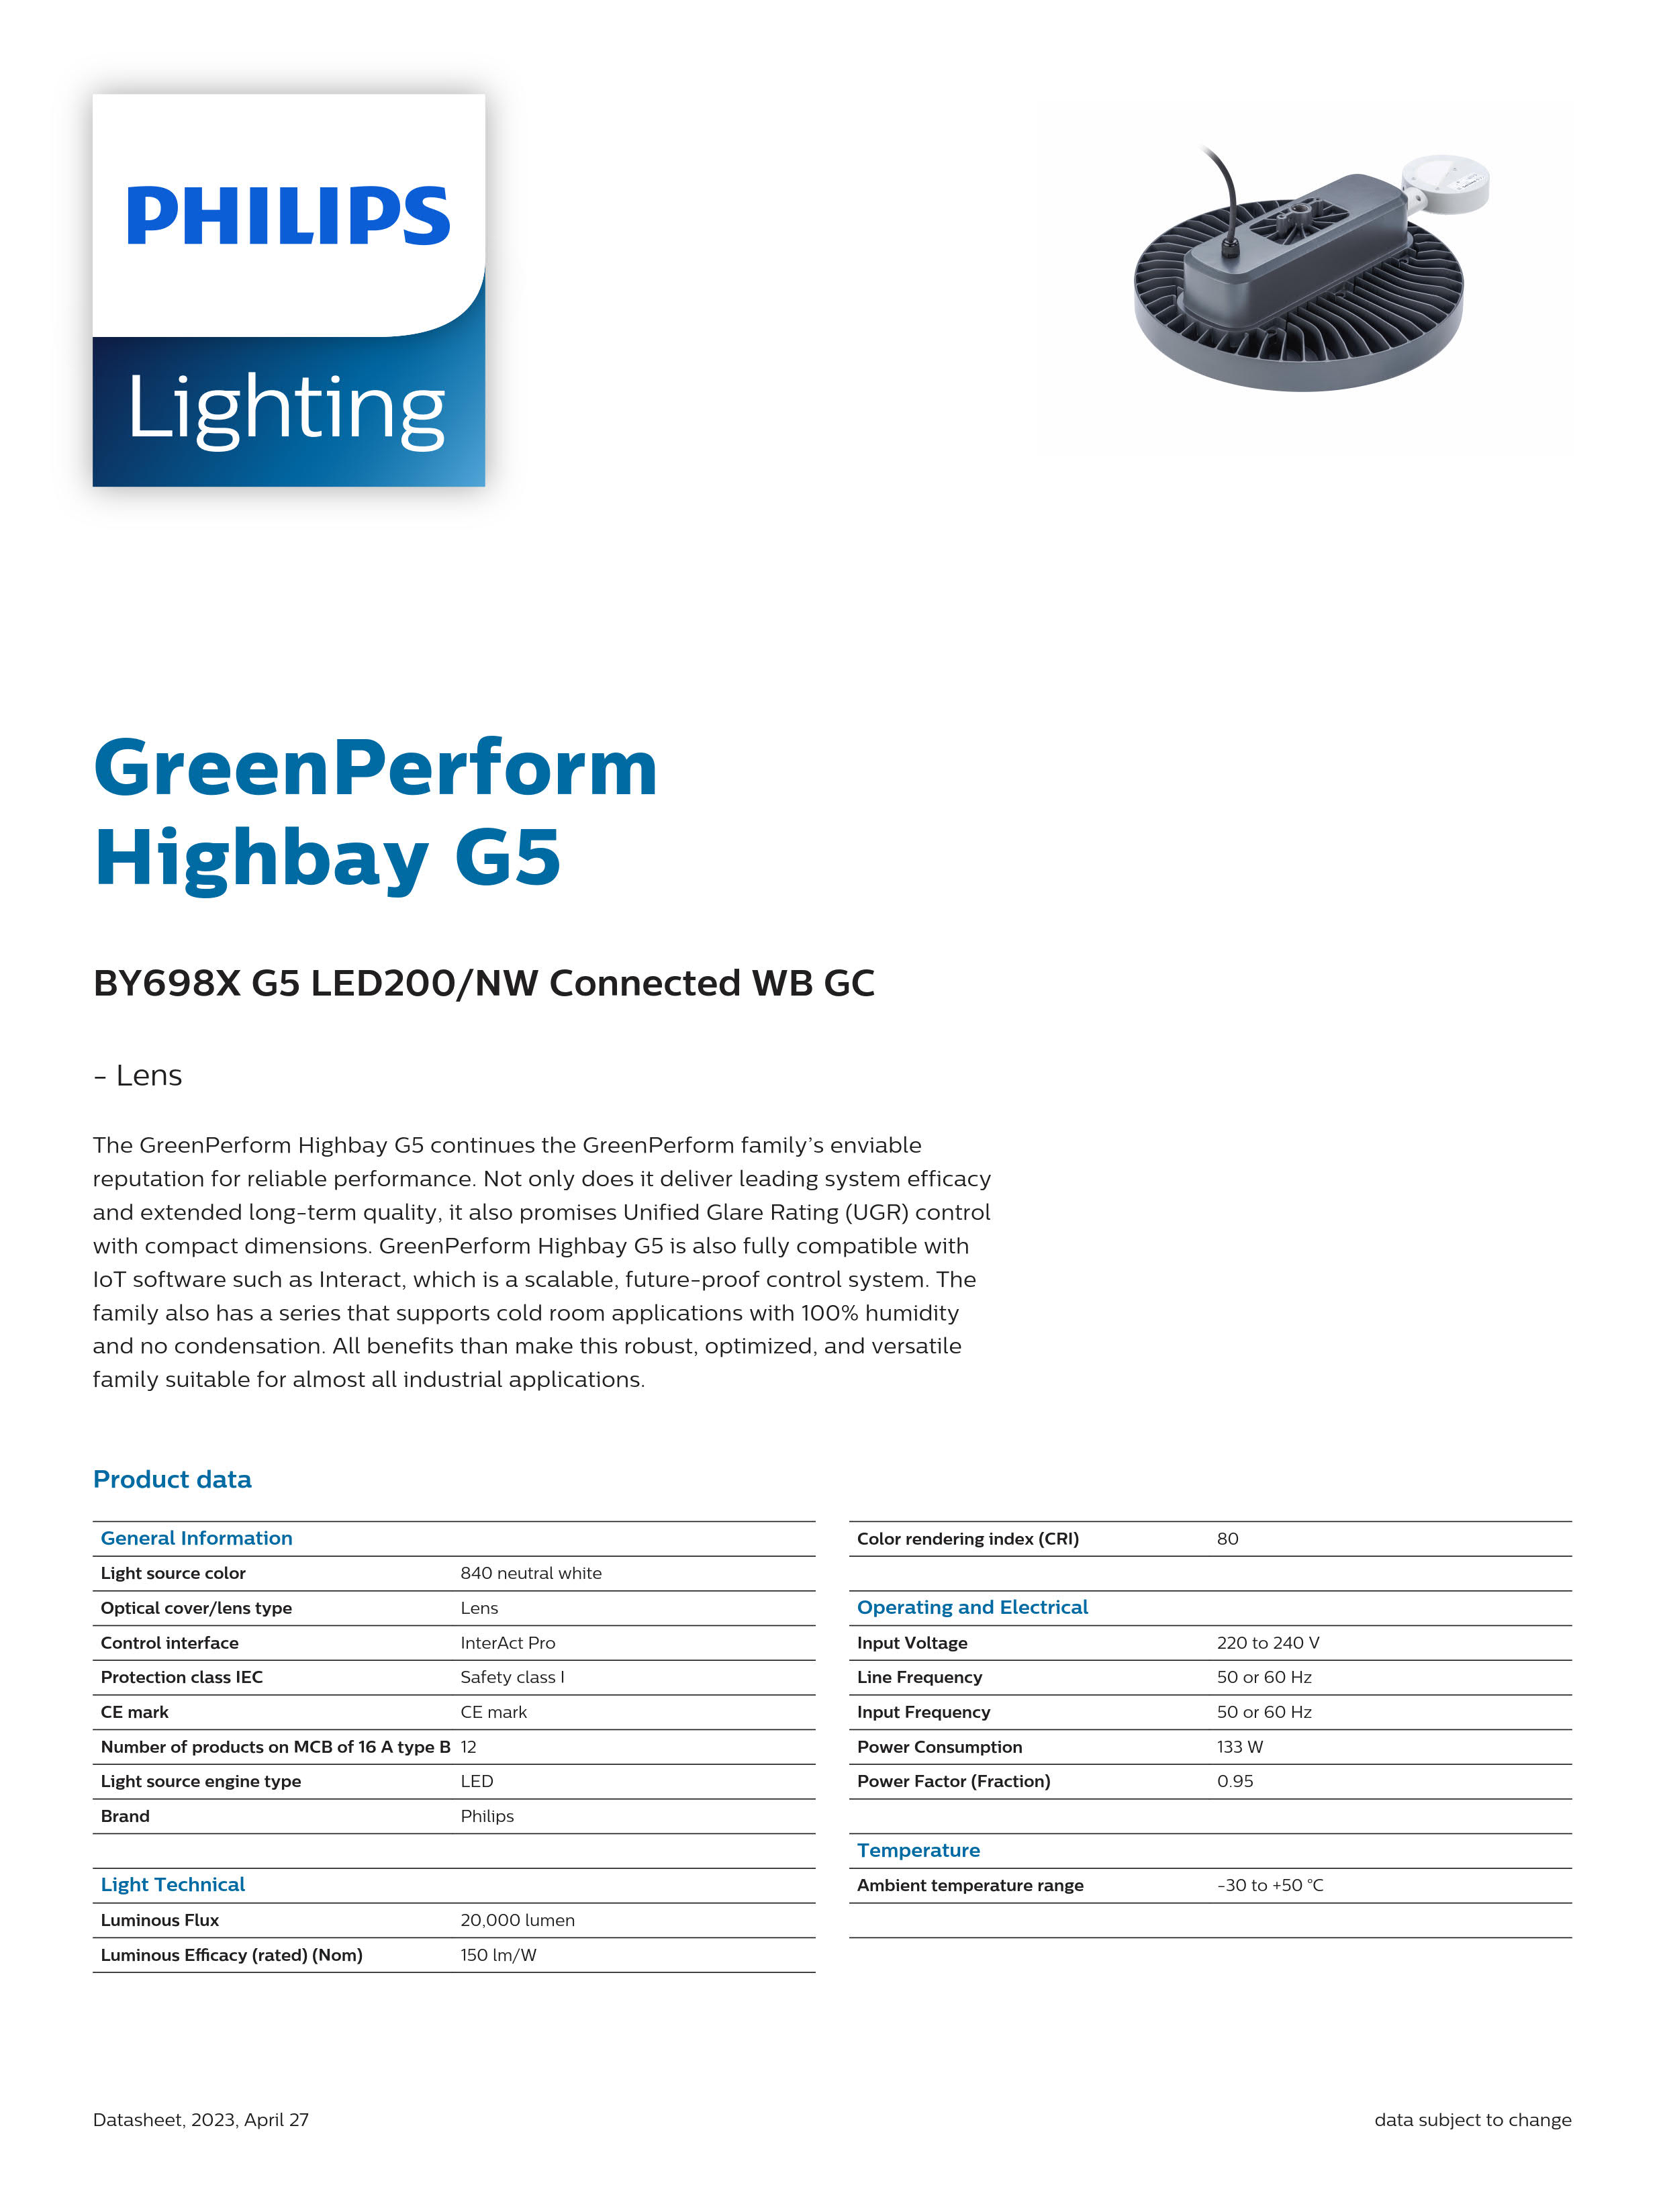 PHILIPS Highbay BY698X G5 LED200/NW Connected WB GC 911401524391